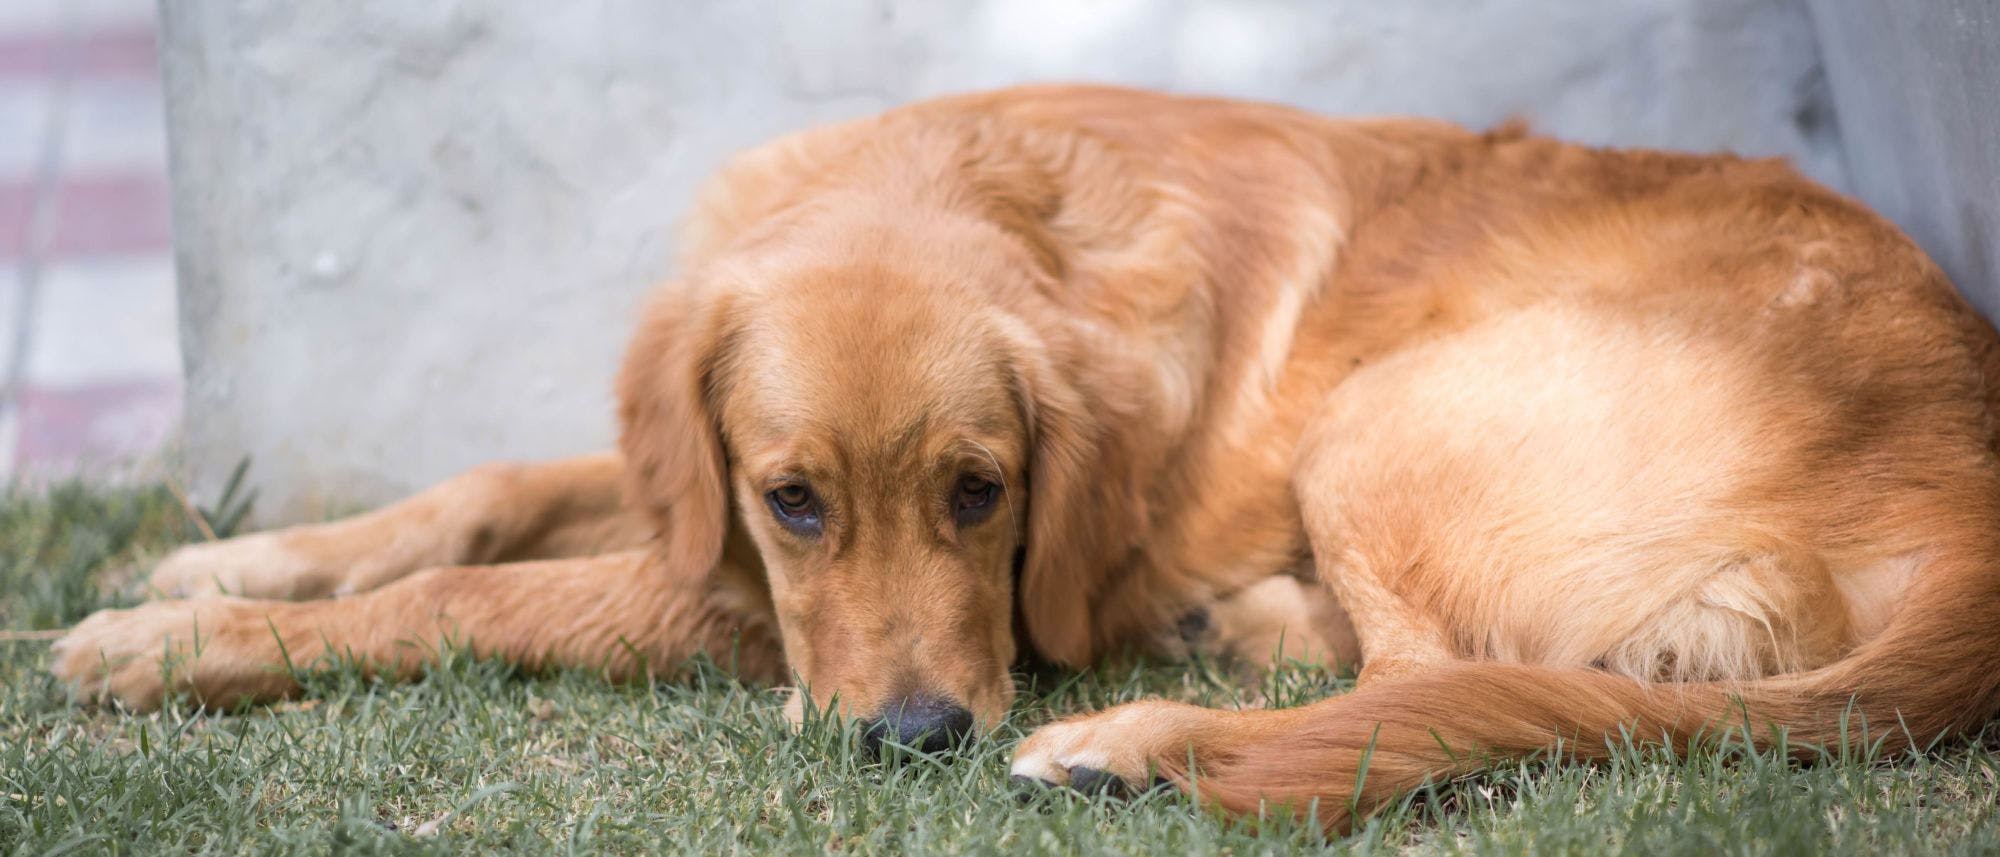 does erythromycin treat contact dermatitis on dogs eyes